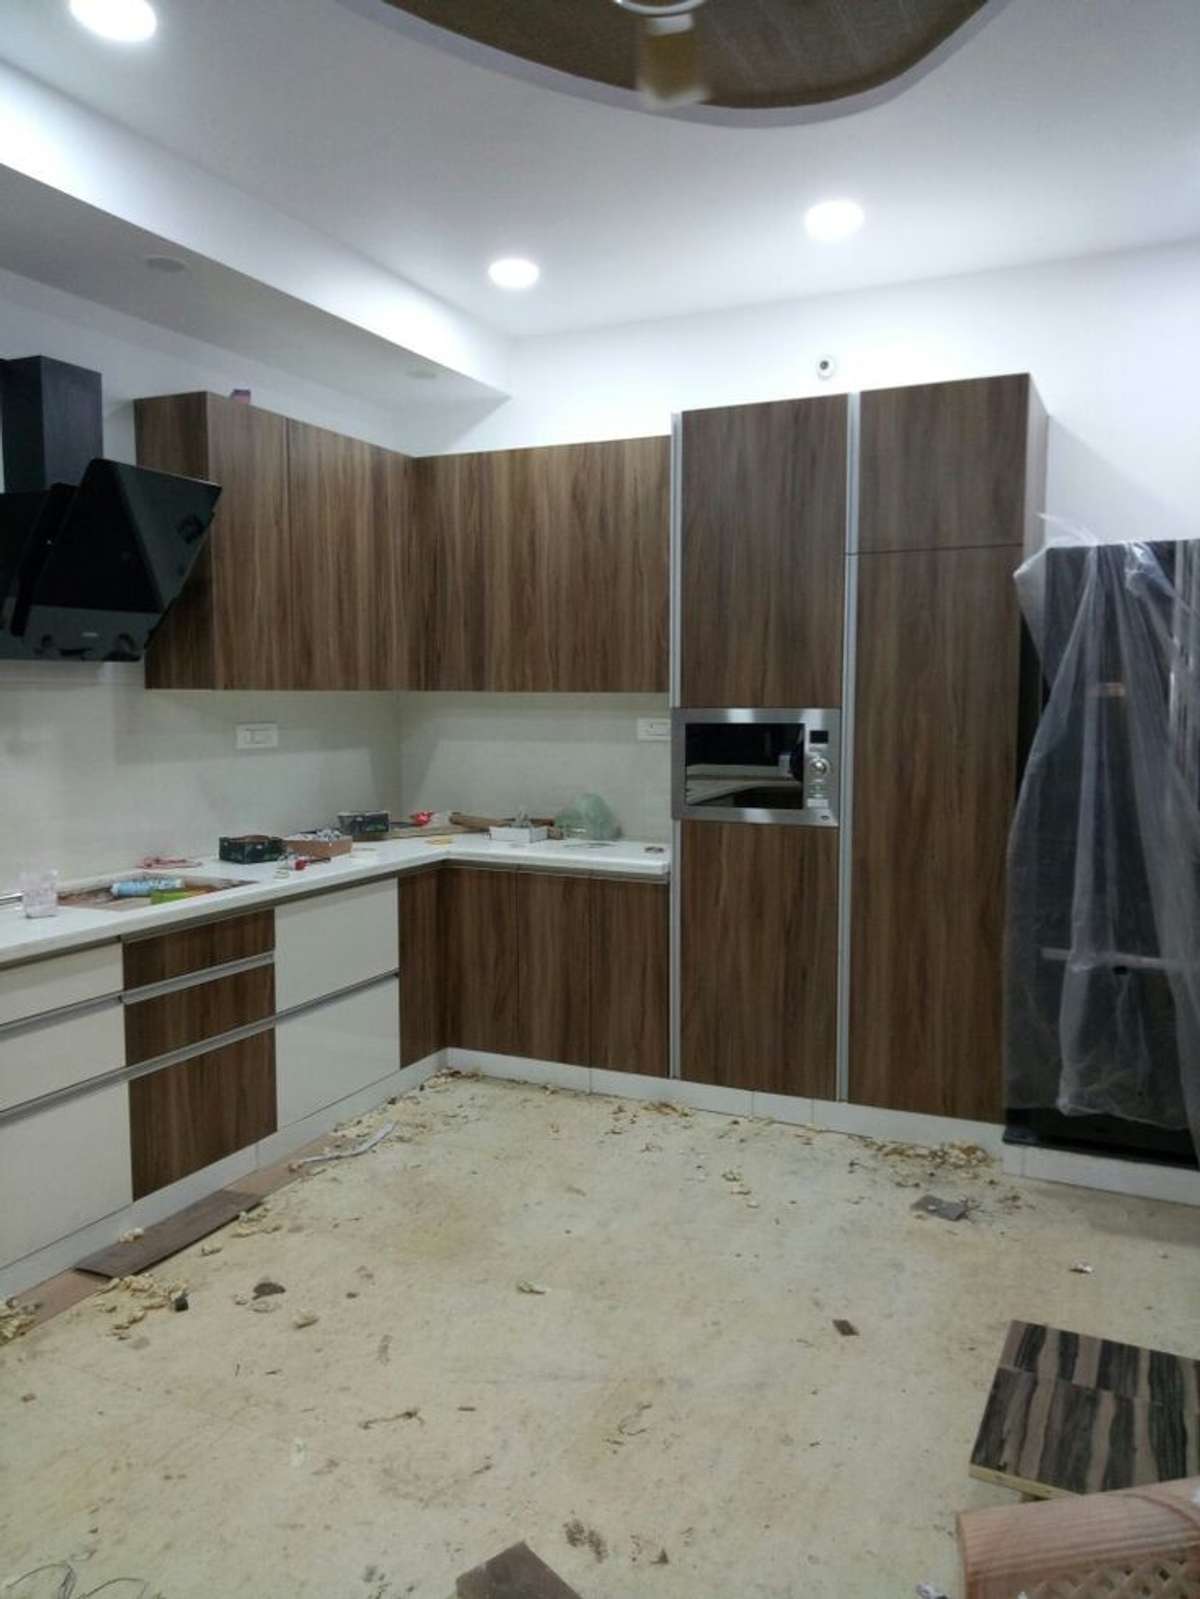 https://youtube.com/channel/UCoGxrToJk75H-hHKOcvHzeQ Subscribe my YouTube channel /FOR Carpenters Call Me 99 272 888 82
Contact Me : For Kitchen & Cupboards Work
I work only in labour rate carpenter available in all Kerala Whatsapp me https://wa.me/919927288882________________________________________________________________________________
#kerala #architecture, #kerala #architect, #kerala #architecture #house #design, #kerala #architecture #house, #kerala #architect #home #design, #kerala #architecture #homes, kerala architecture Living  р┤Ьр┤┐р┤кр╡Нр┤╕р┤В р┤╕р┤┐р┤▓р┤┐р┤Щр╡Н р┤╡р┤┐р┤др╡Нр┤др╡Н р┤╡р╡Бр┤бр╡╗ р┤╡р╡╝р┤Хр╡Нр┤Хр╡Н ,dining,stair area р┤Ьр┤┐р┤кр╡Нр┤╕р┤В р┤╕р┤┐р┤▓р┤┐р┤Щр╡Н , р┤кр┤░р╡Нр┤Чр╡Лр┤│ р┤кр┤╛р┤ир┤▓р┤┐р┤Щр╡Н ,Tv unit  stair р┤Пр┤░р┤┐р┤п with storage ,architraves,
Modular kitchen , work area ,
living wall texture painting , р┤╕р╡Ар┤мр╡Нр┤░ р┤мр╡Нр┤▓р╡Ир╡╗р┤бр╡НтАМр┤╕р╡Н р┤Ор┤ир╡А р┤╡р╡╝р┤Хр╡Нр┤Хр╡Бр┤Хр╡╛ р┤Жр┤гр╡Н р┤Зр┤╡р┤┐р┤Яр╡Ж р┤Ър╡Жр┤пр╡Нр┤др┤┐р┤░р┤┐р┤Хр╡Бр┤ир┤др╡Н .

710 marine plywood with mica lamination р┤Жр┤гр╡Н р┤Йр┤кр┤пр╡Лр┤Чр┤┐р┤Ър╡Нр┤Ър┤┐р┤░р┤┐р┤Хр╡Нр┤Хр╡Бр┤ир╡Нр┤ир┤др╡Н.

Special Thanks Kerala carpentry team for your hard work 

For more information pls call 

Kerala Interiors
+9199272 88882
Kerala Architect